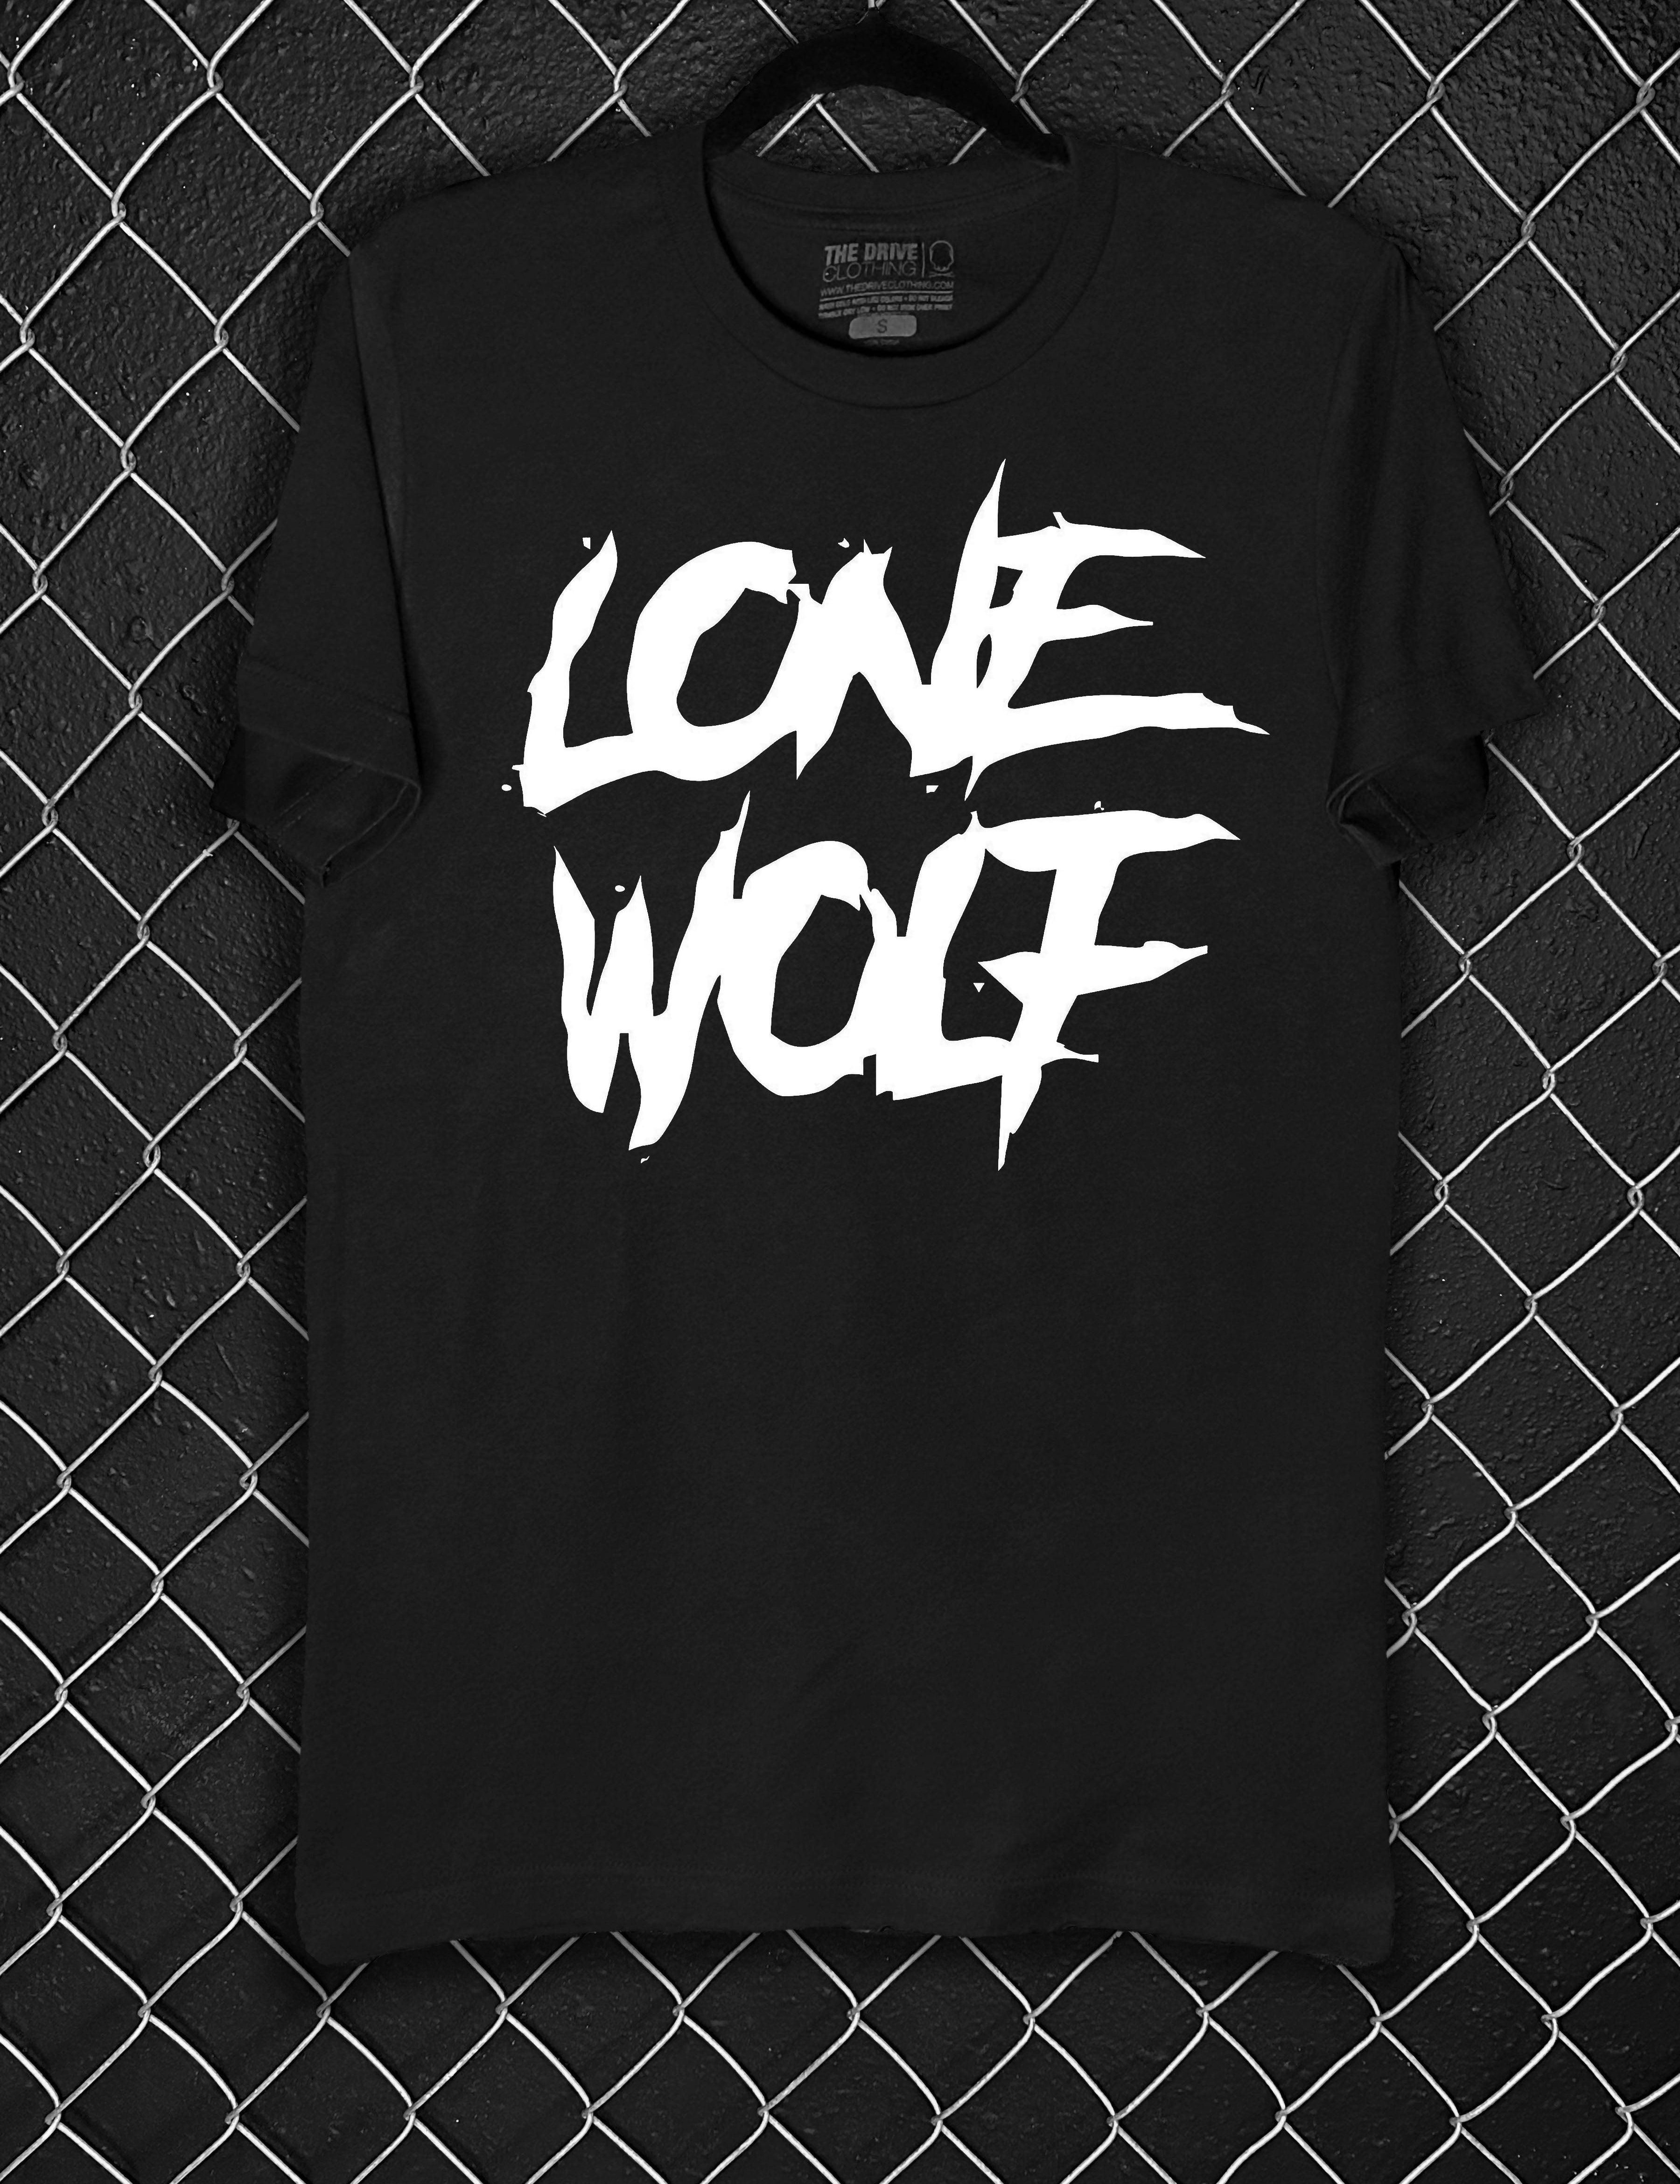 LONE WOLF CLASSIC TEE - The Drive Clothing